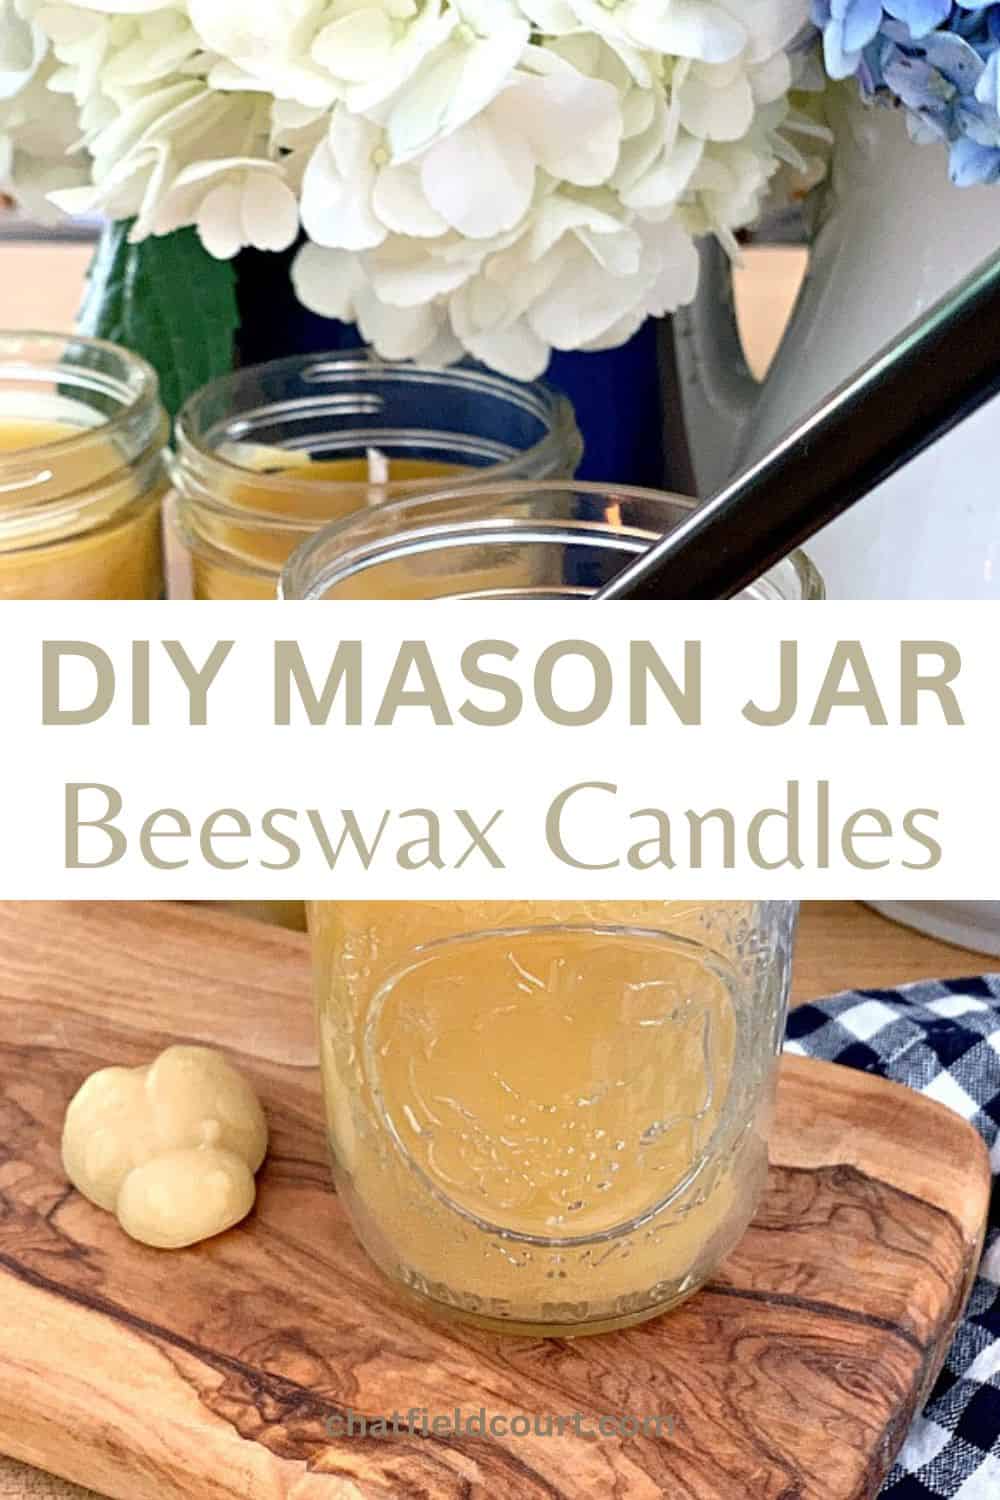 lighting a beeswax candle in a mason jar